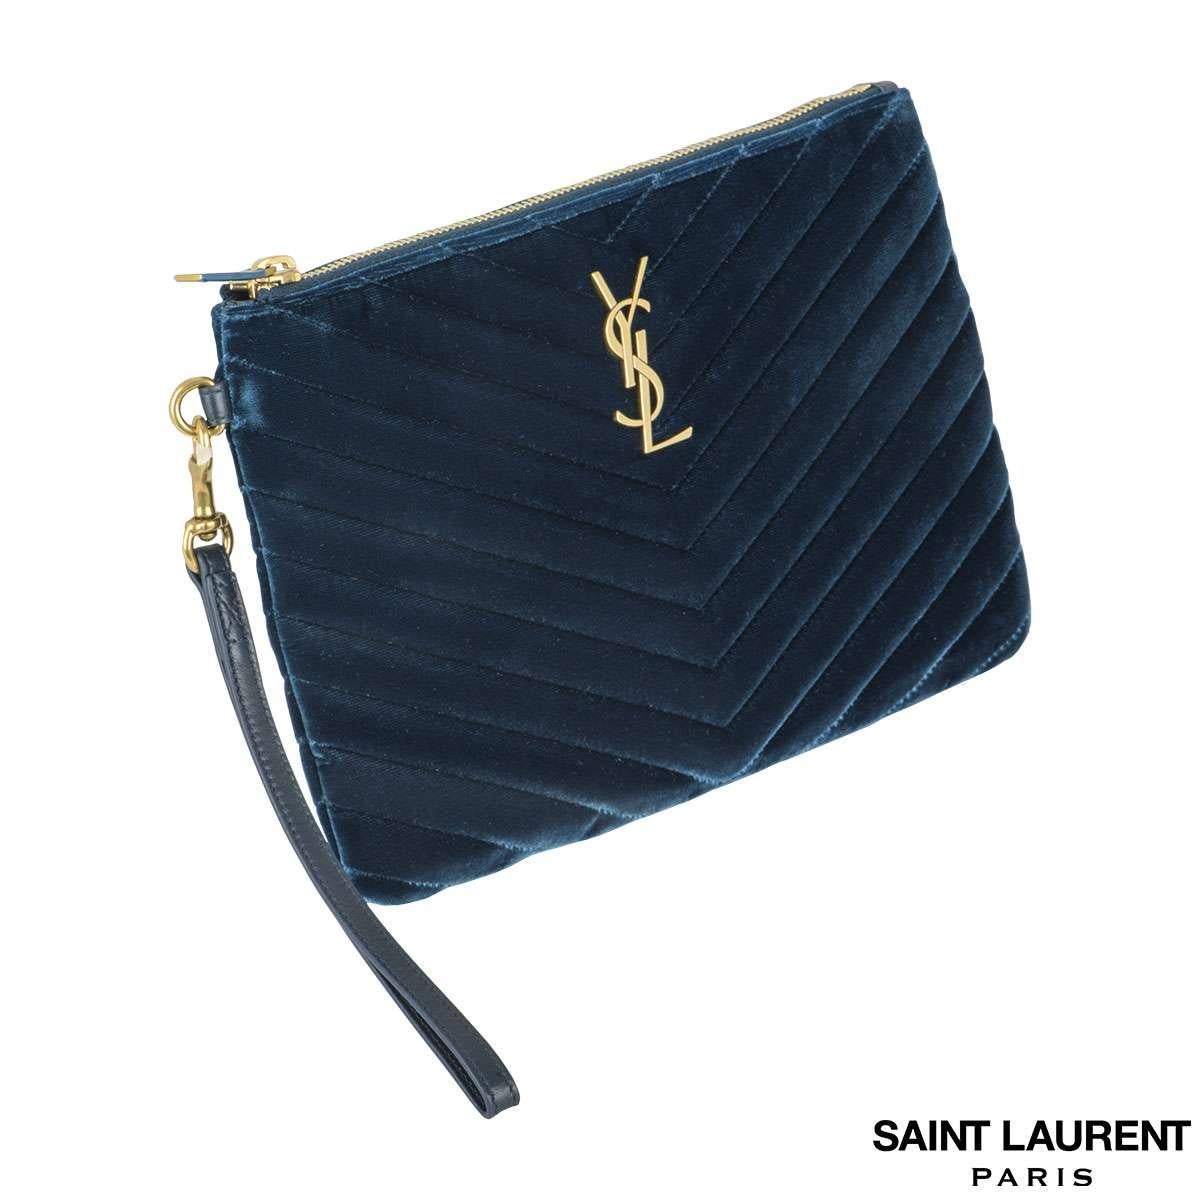 This unworn YSL clutch in midnight blue velvet stitched in a chevron pattern contrasts beautifully with the gold logo in front. The fabric lined interior comes with flap pocket. The bag is unworn in condition and comes along with its box, Dustbag